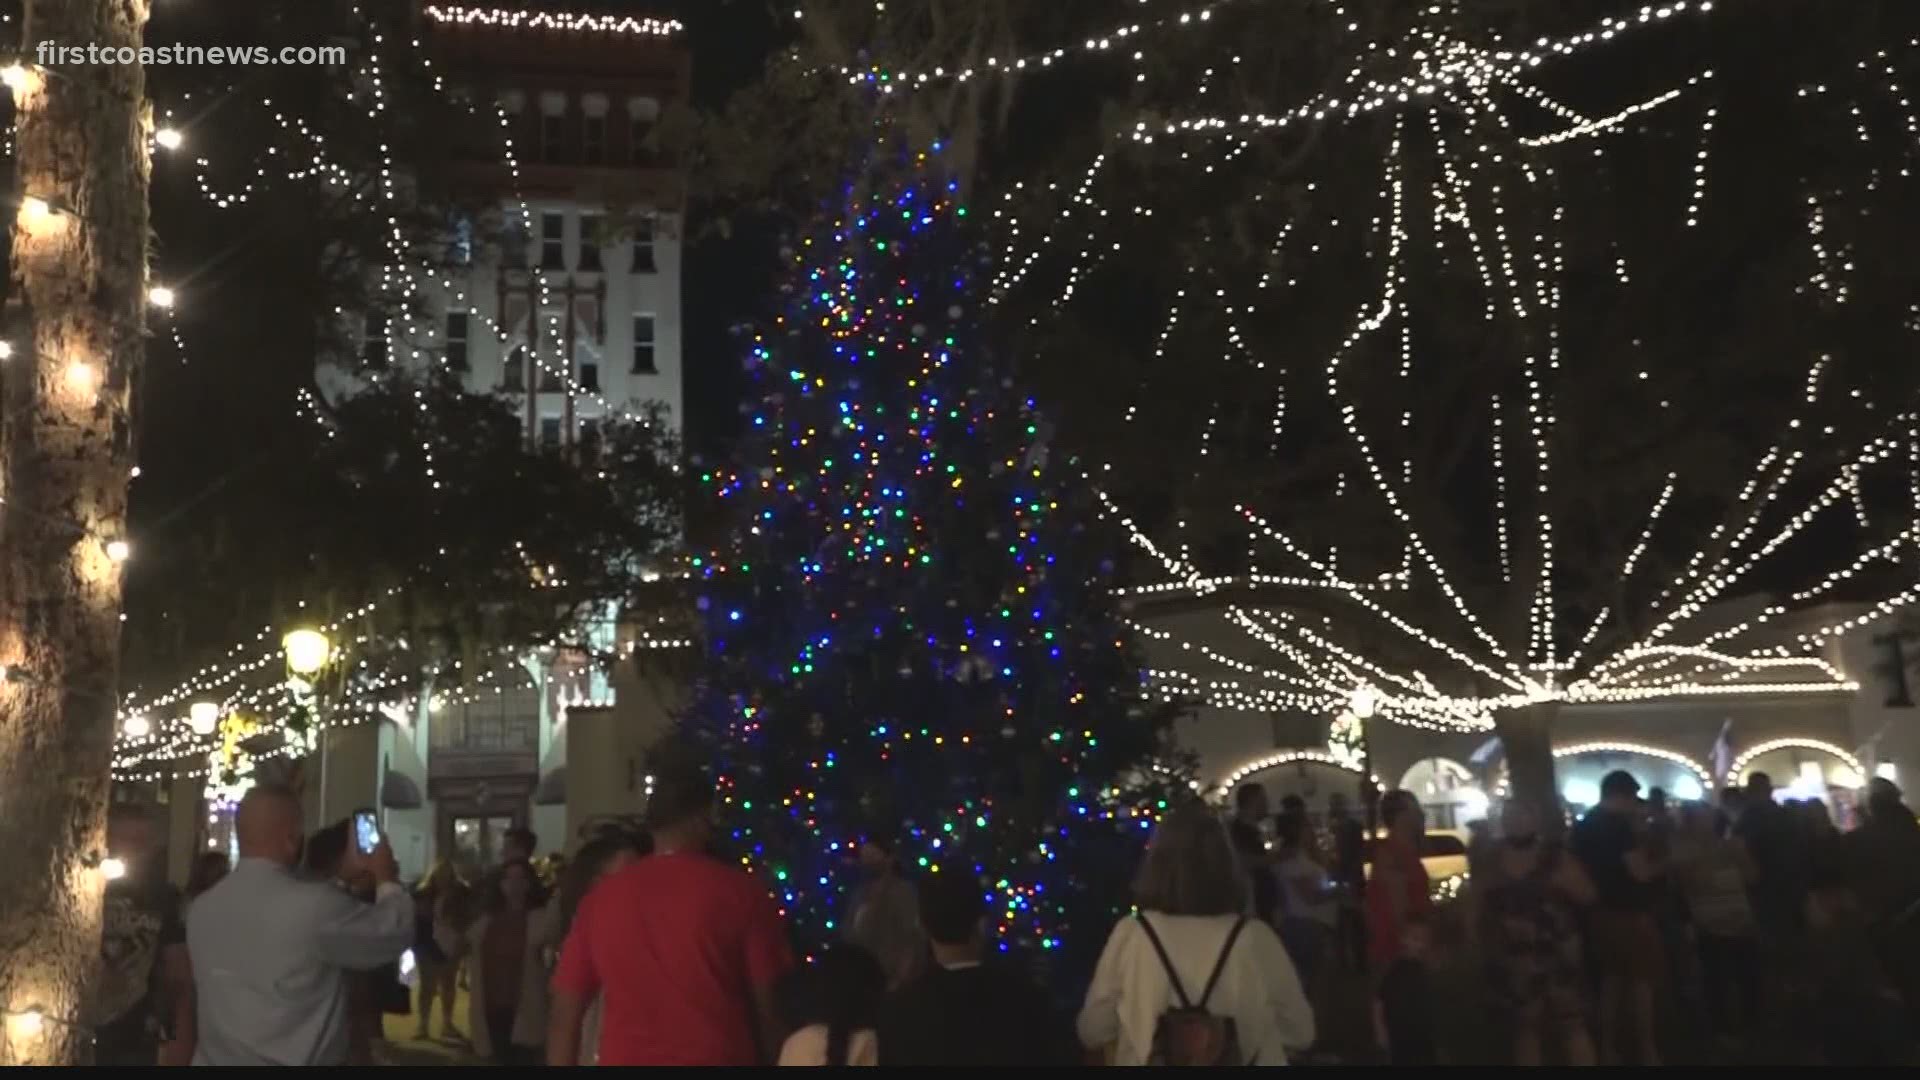 First Coast News asked local leaders in St. Augustine if they are concerned about the crowds at Nights of Lights. In a word, they say, "yes!"